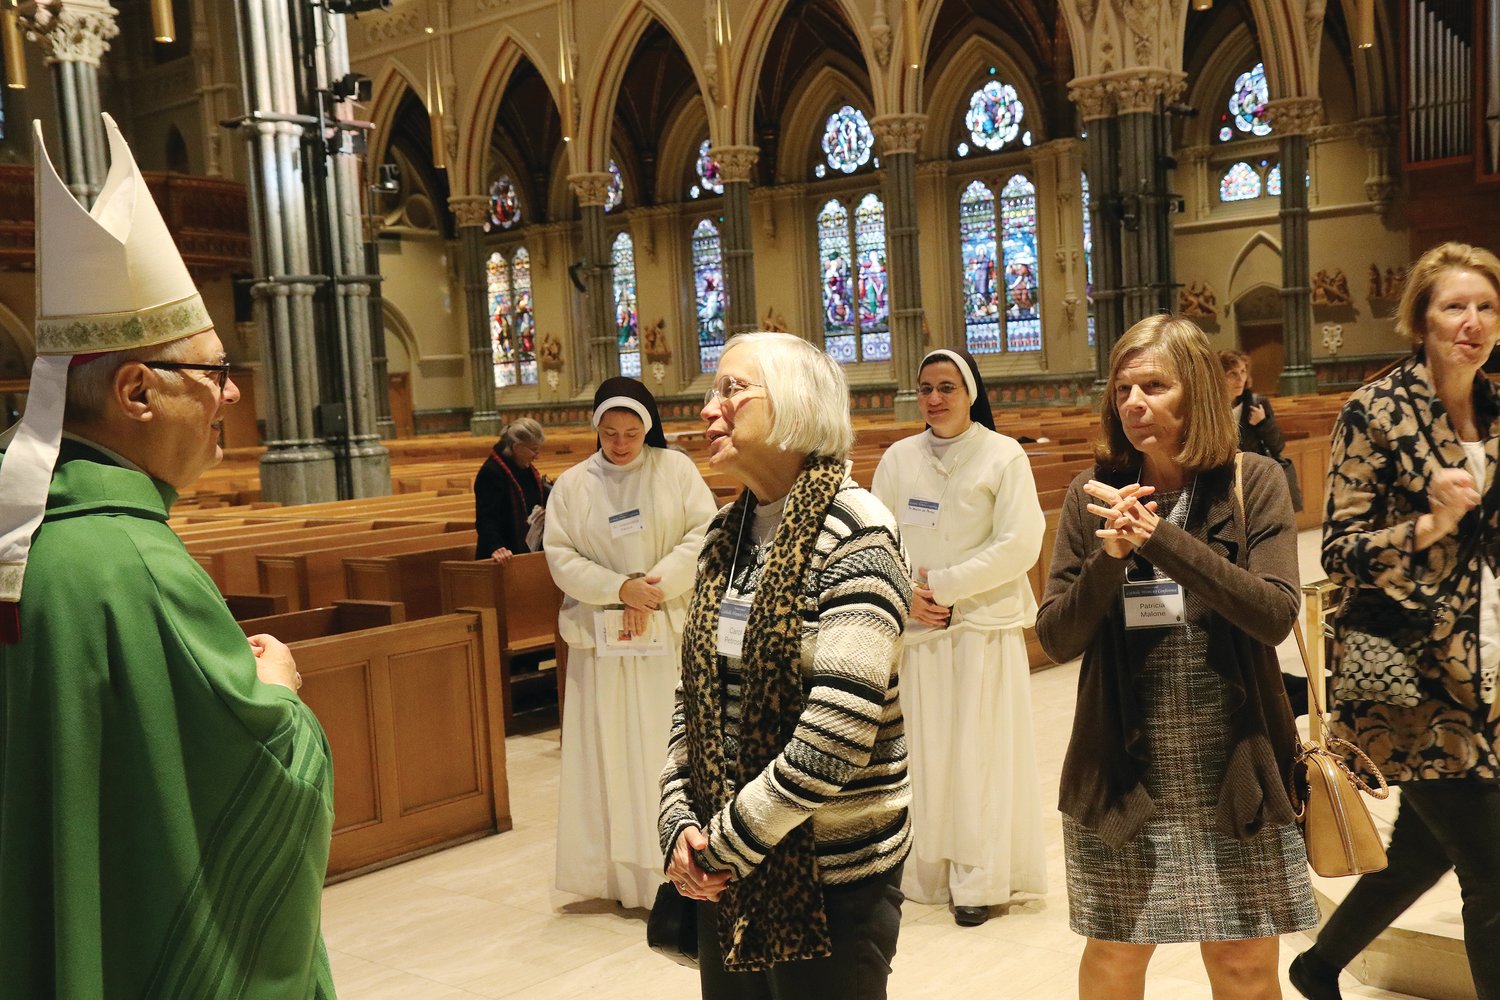 The annual Rhode Island Catholic Women’s Conference was held on Saturday, Nov. 6, at the Cathedral of SS. Peter and Paul beginning at 8:30 a.m. with Mass celebrated by Bishop Thomas J. Tobin.